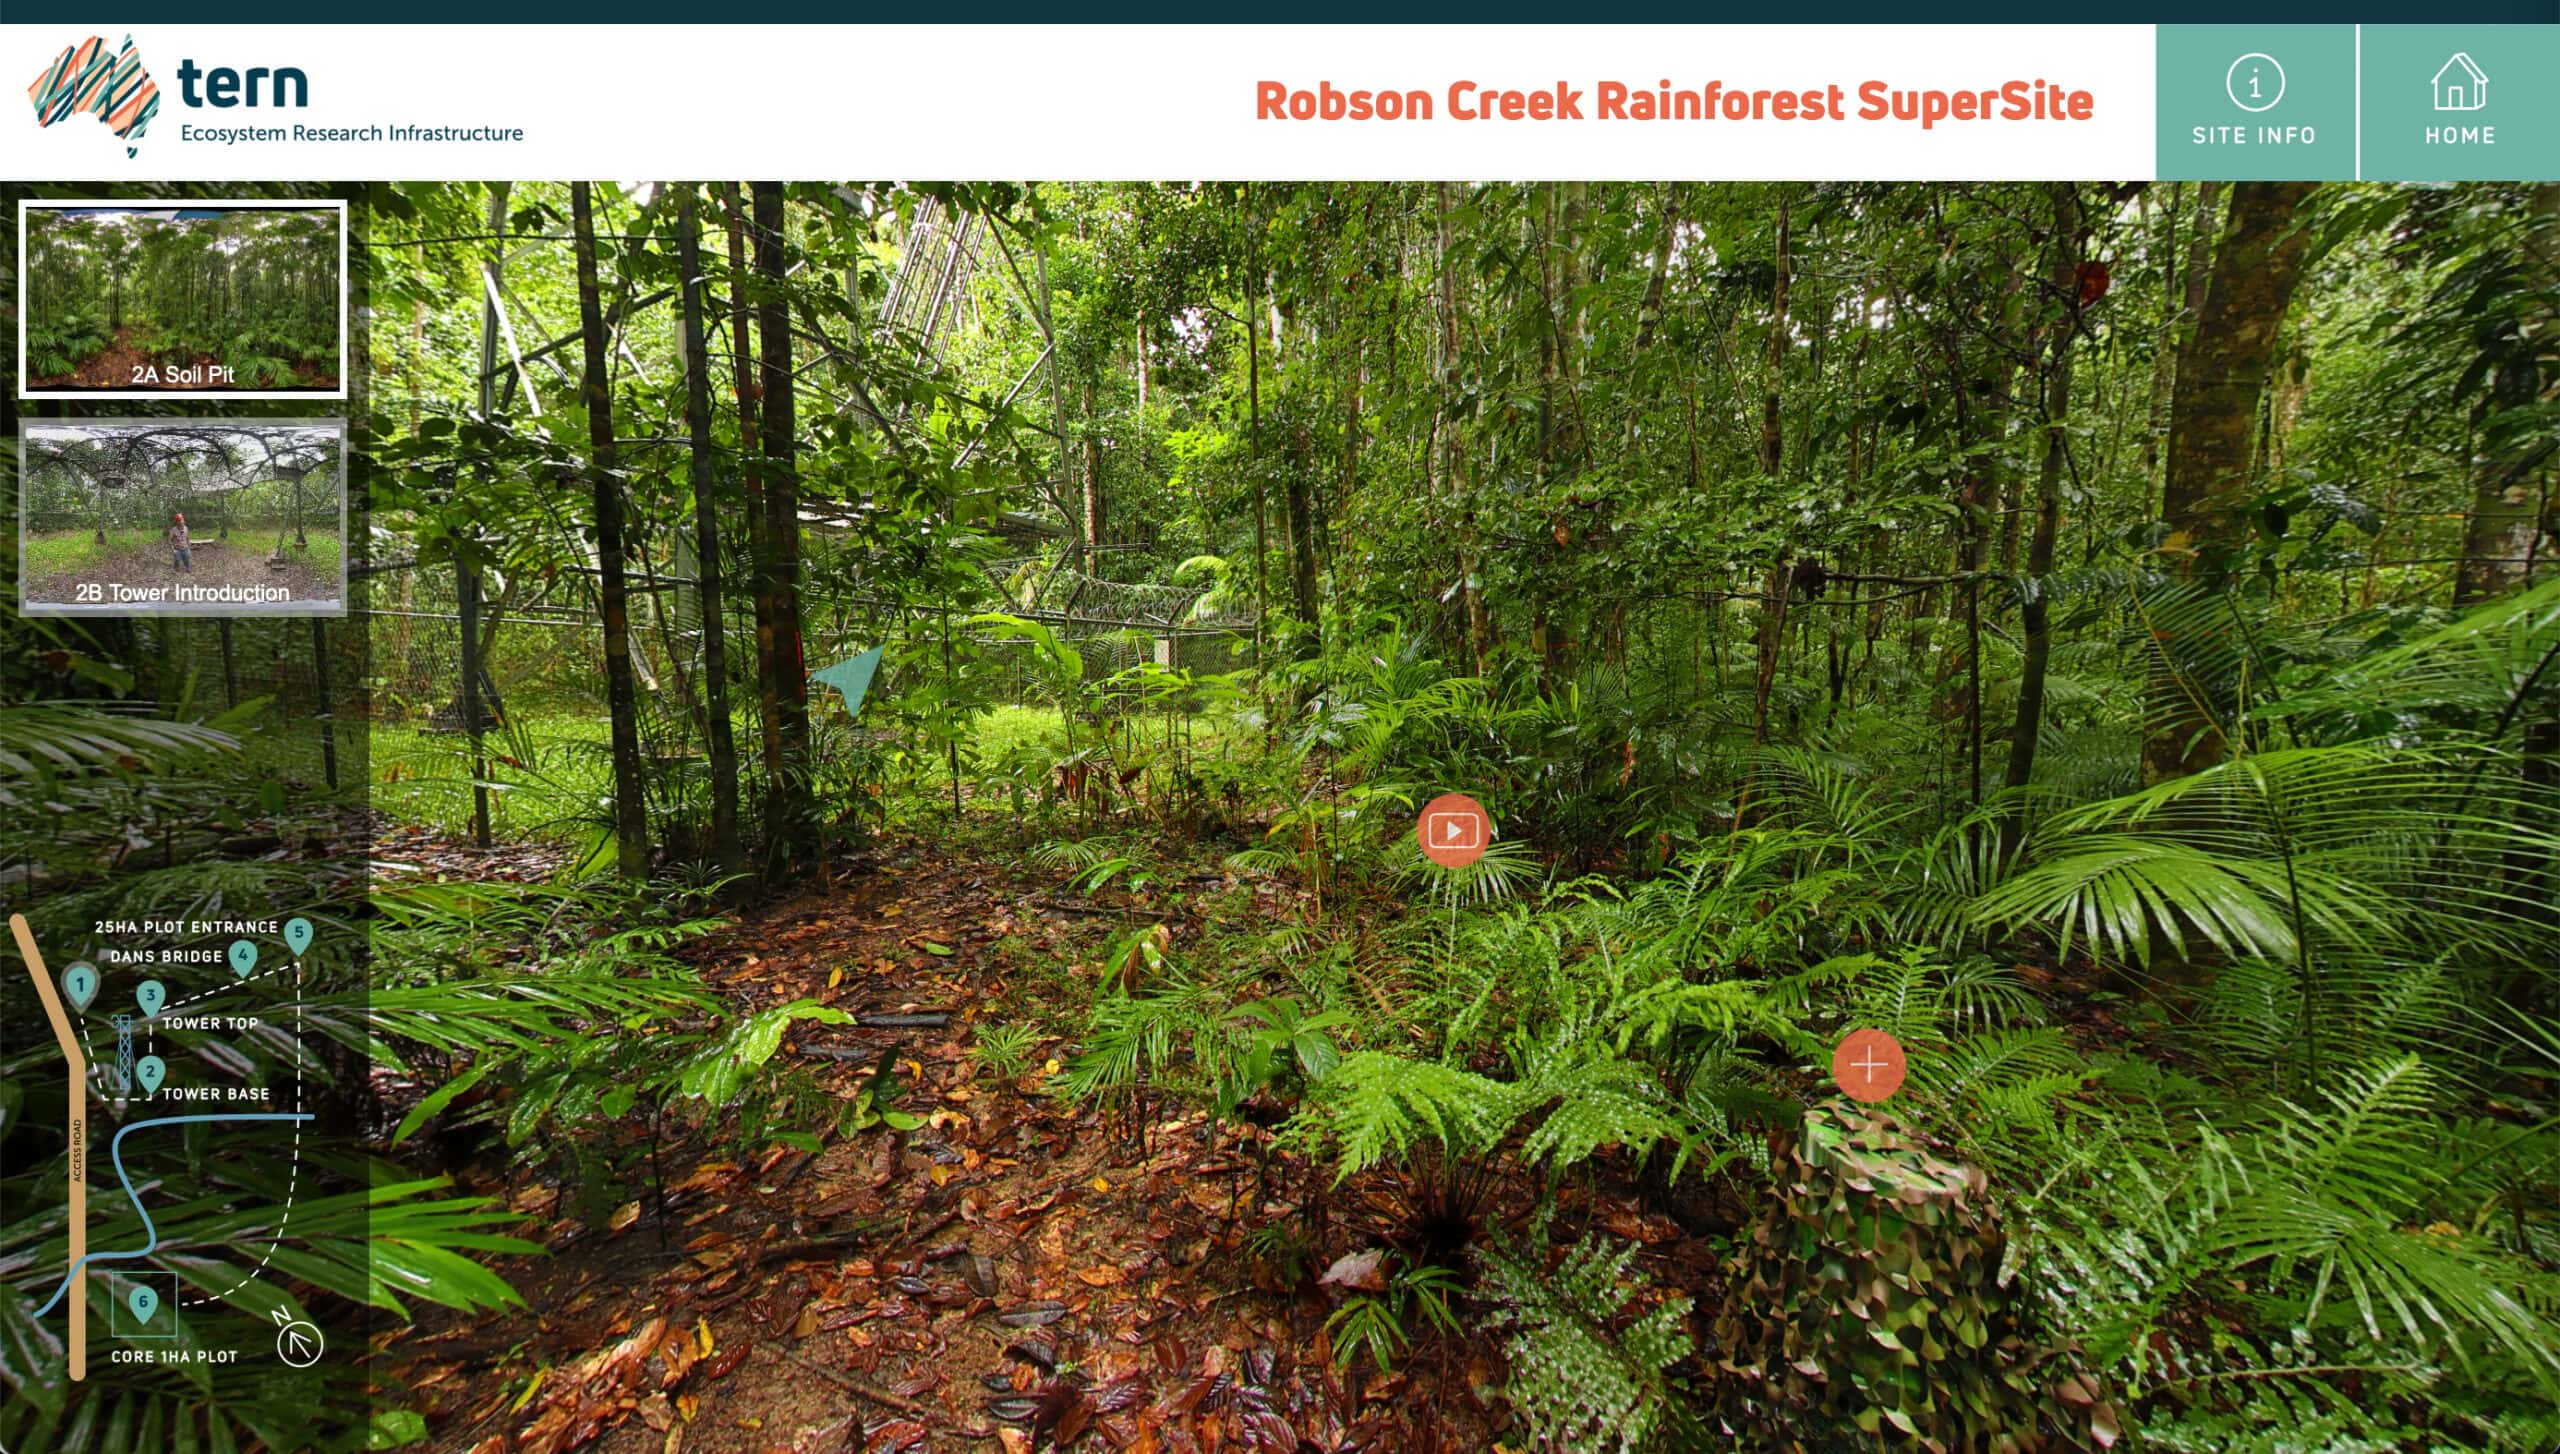 Robson Creek Rainforest Supersite info page | Featured Image for Table page by TERN.